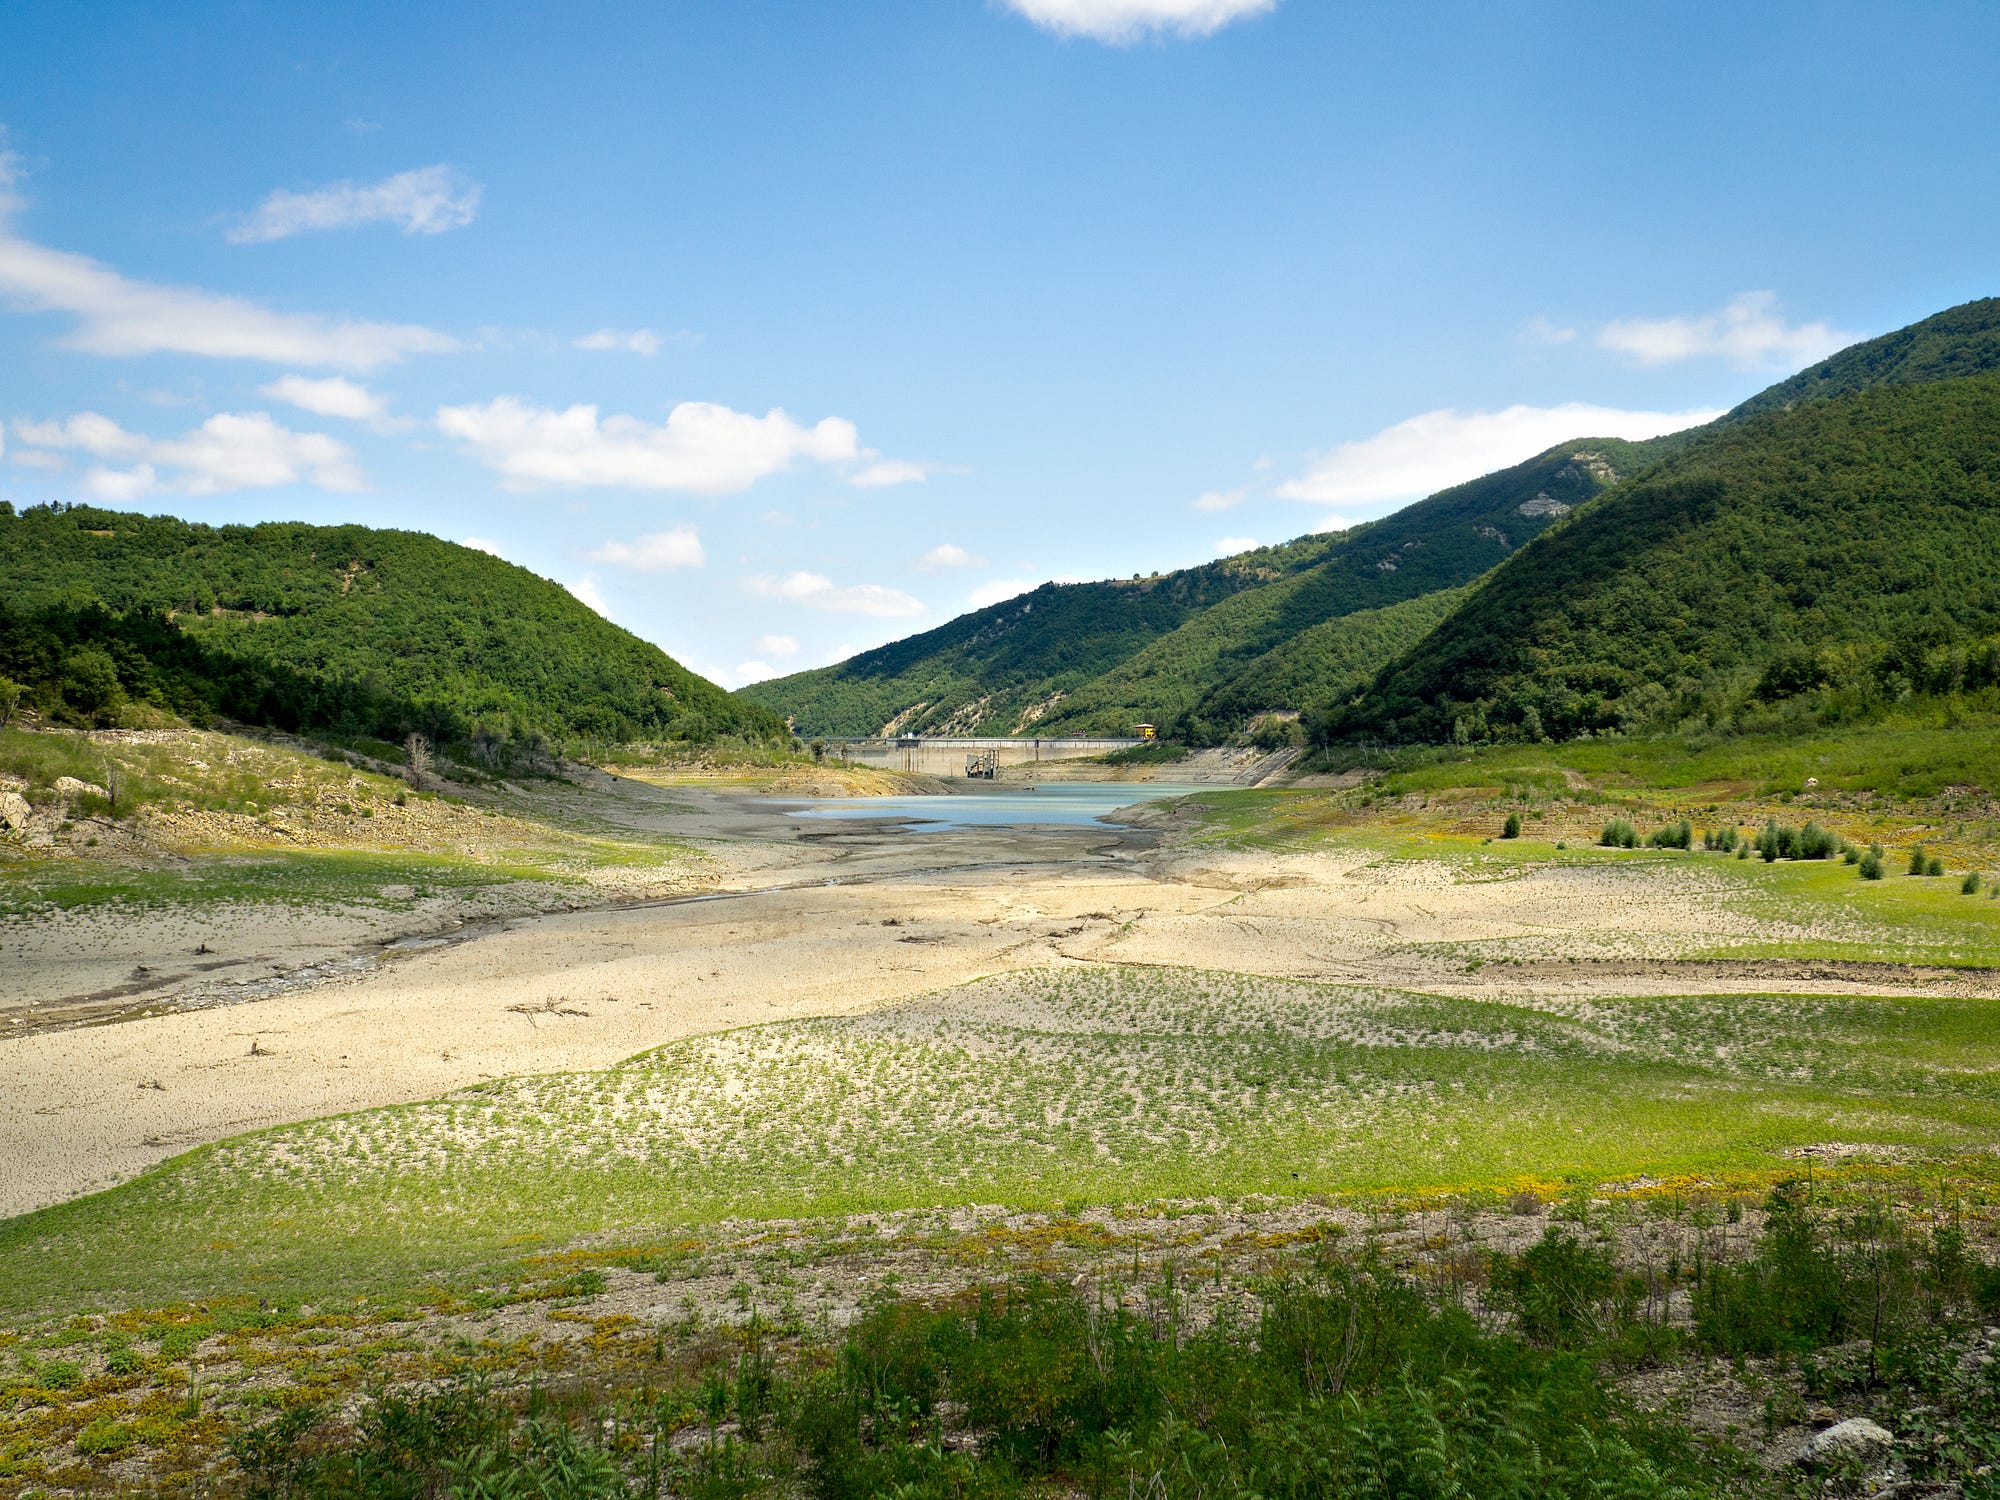 In Italy’s parched Po River valley, climate change threatens the future